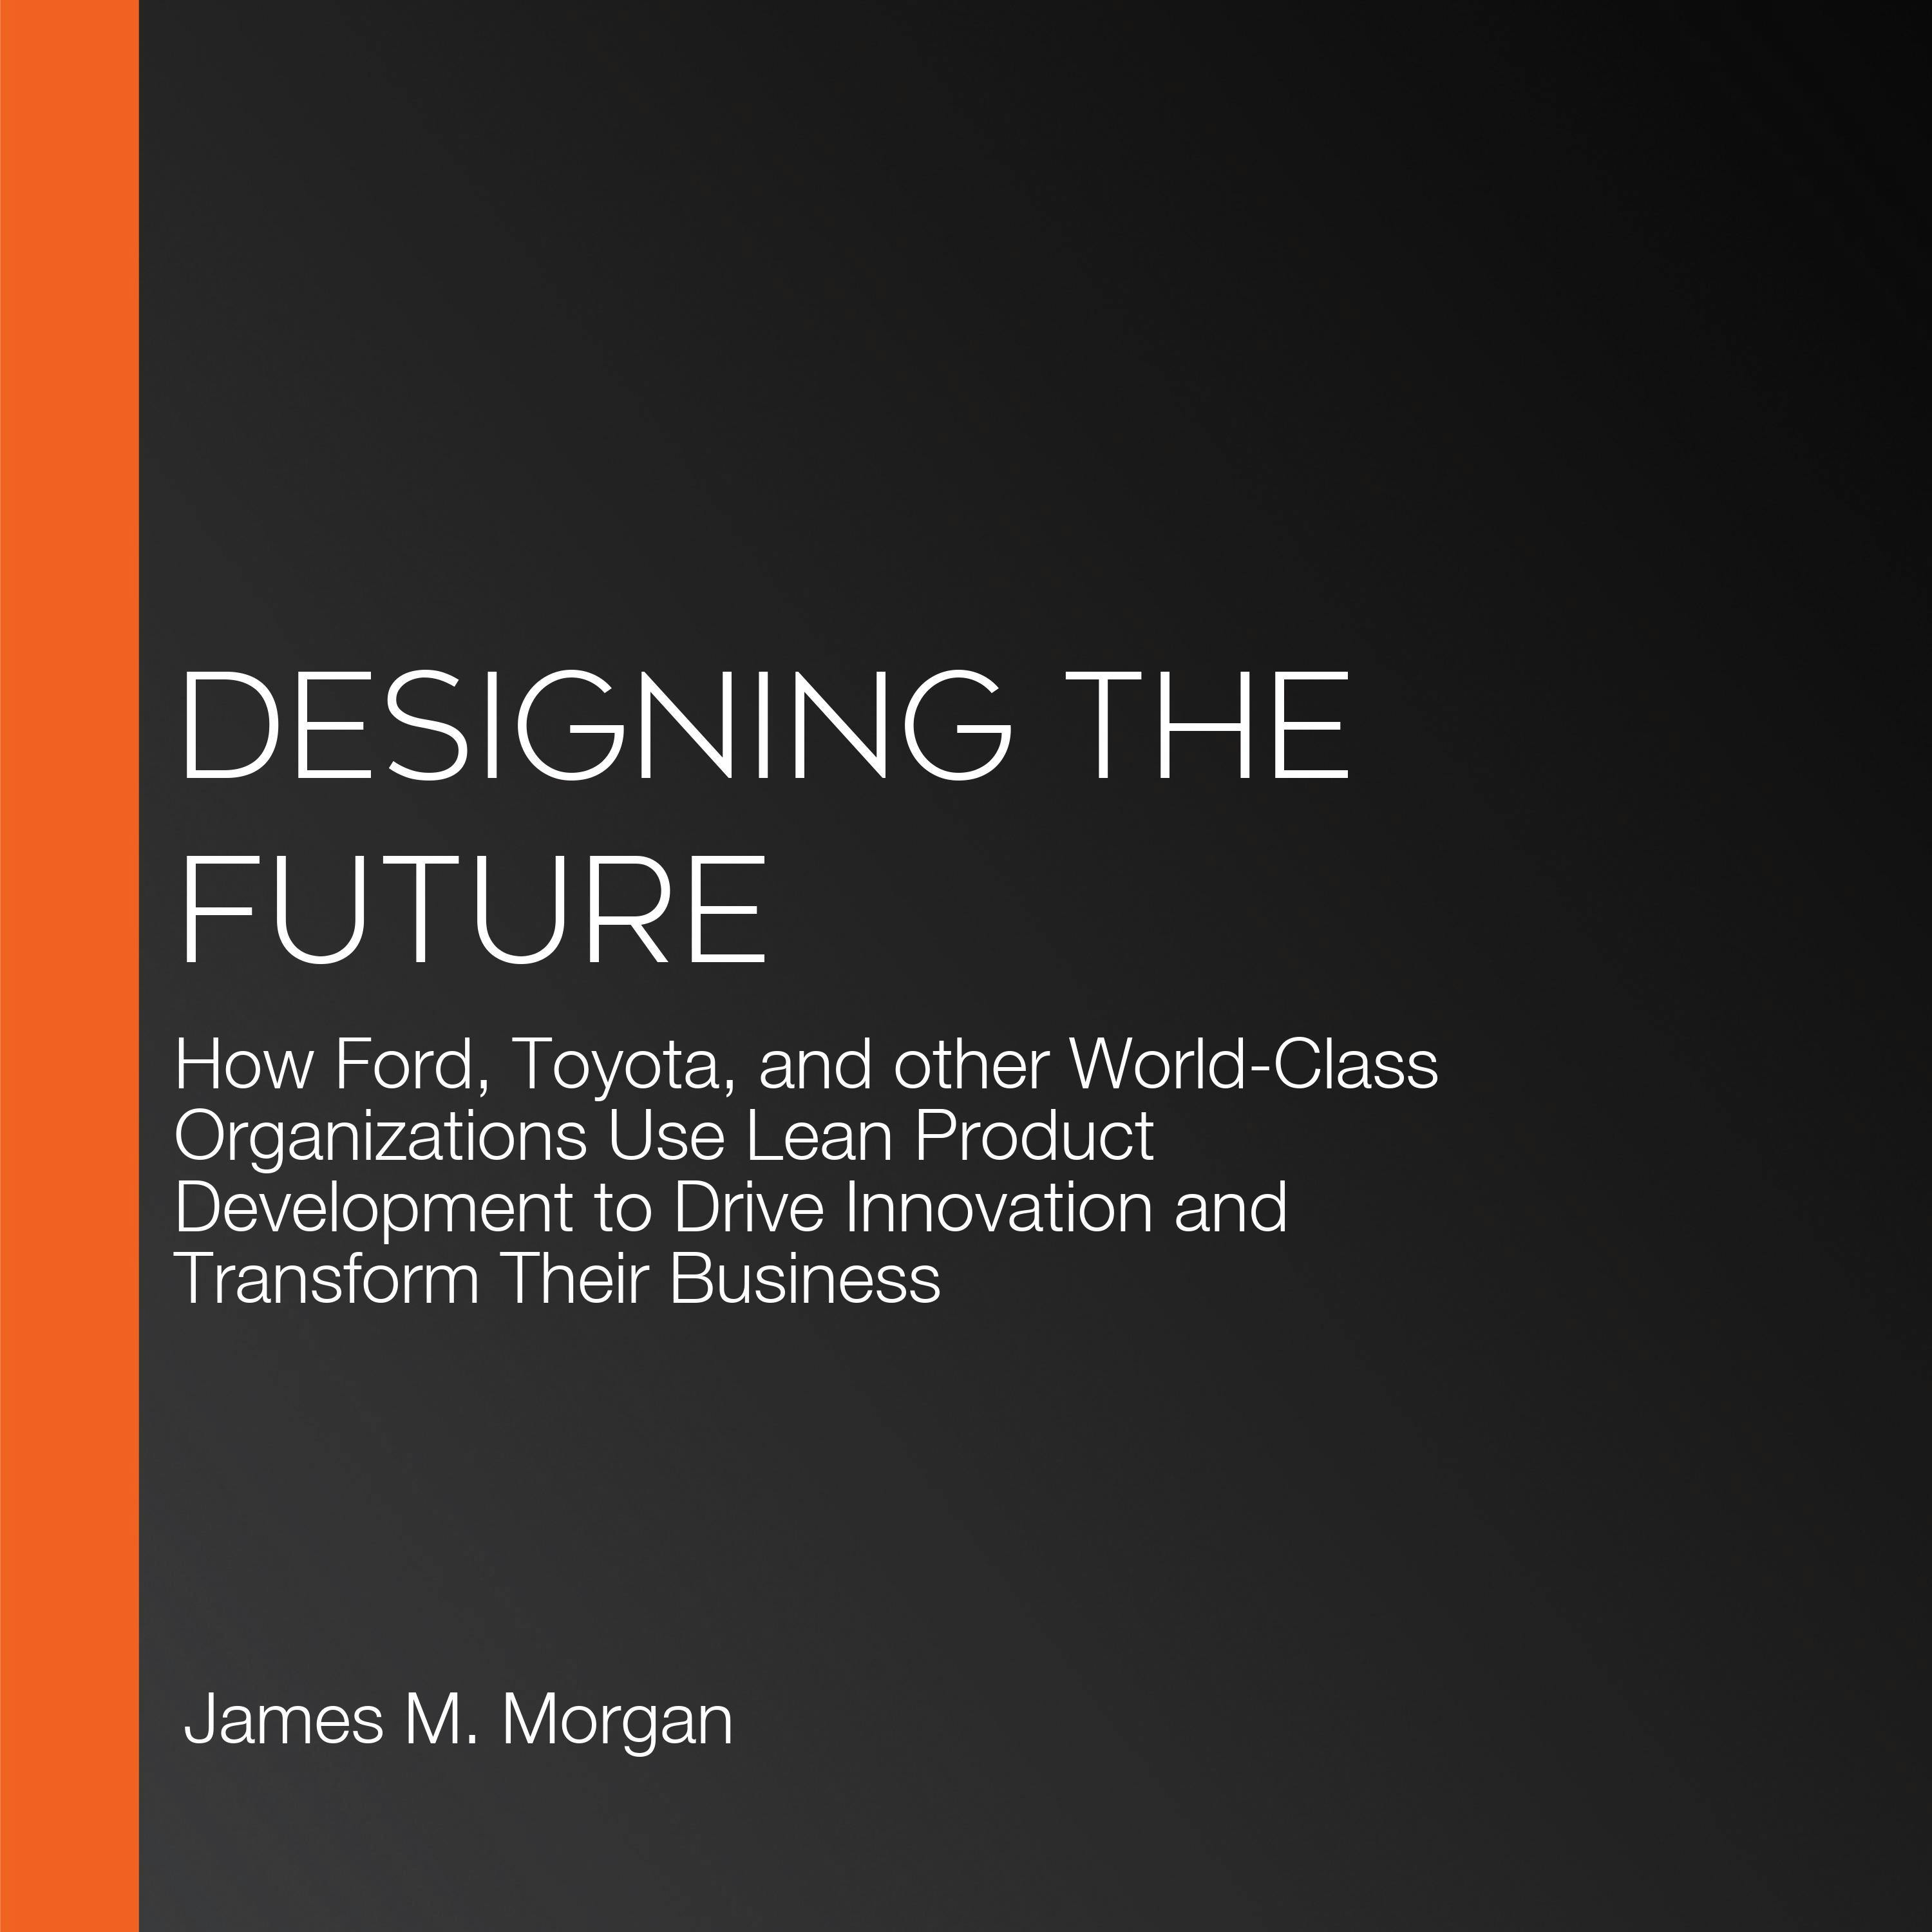 Designing the Future: How Ford, Toyota, and other World-Class Organizations Use Lean Product Development to Drive Innovation and Transform Their Business - undefined